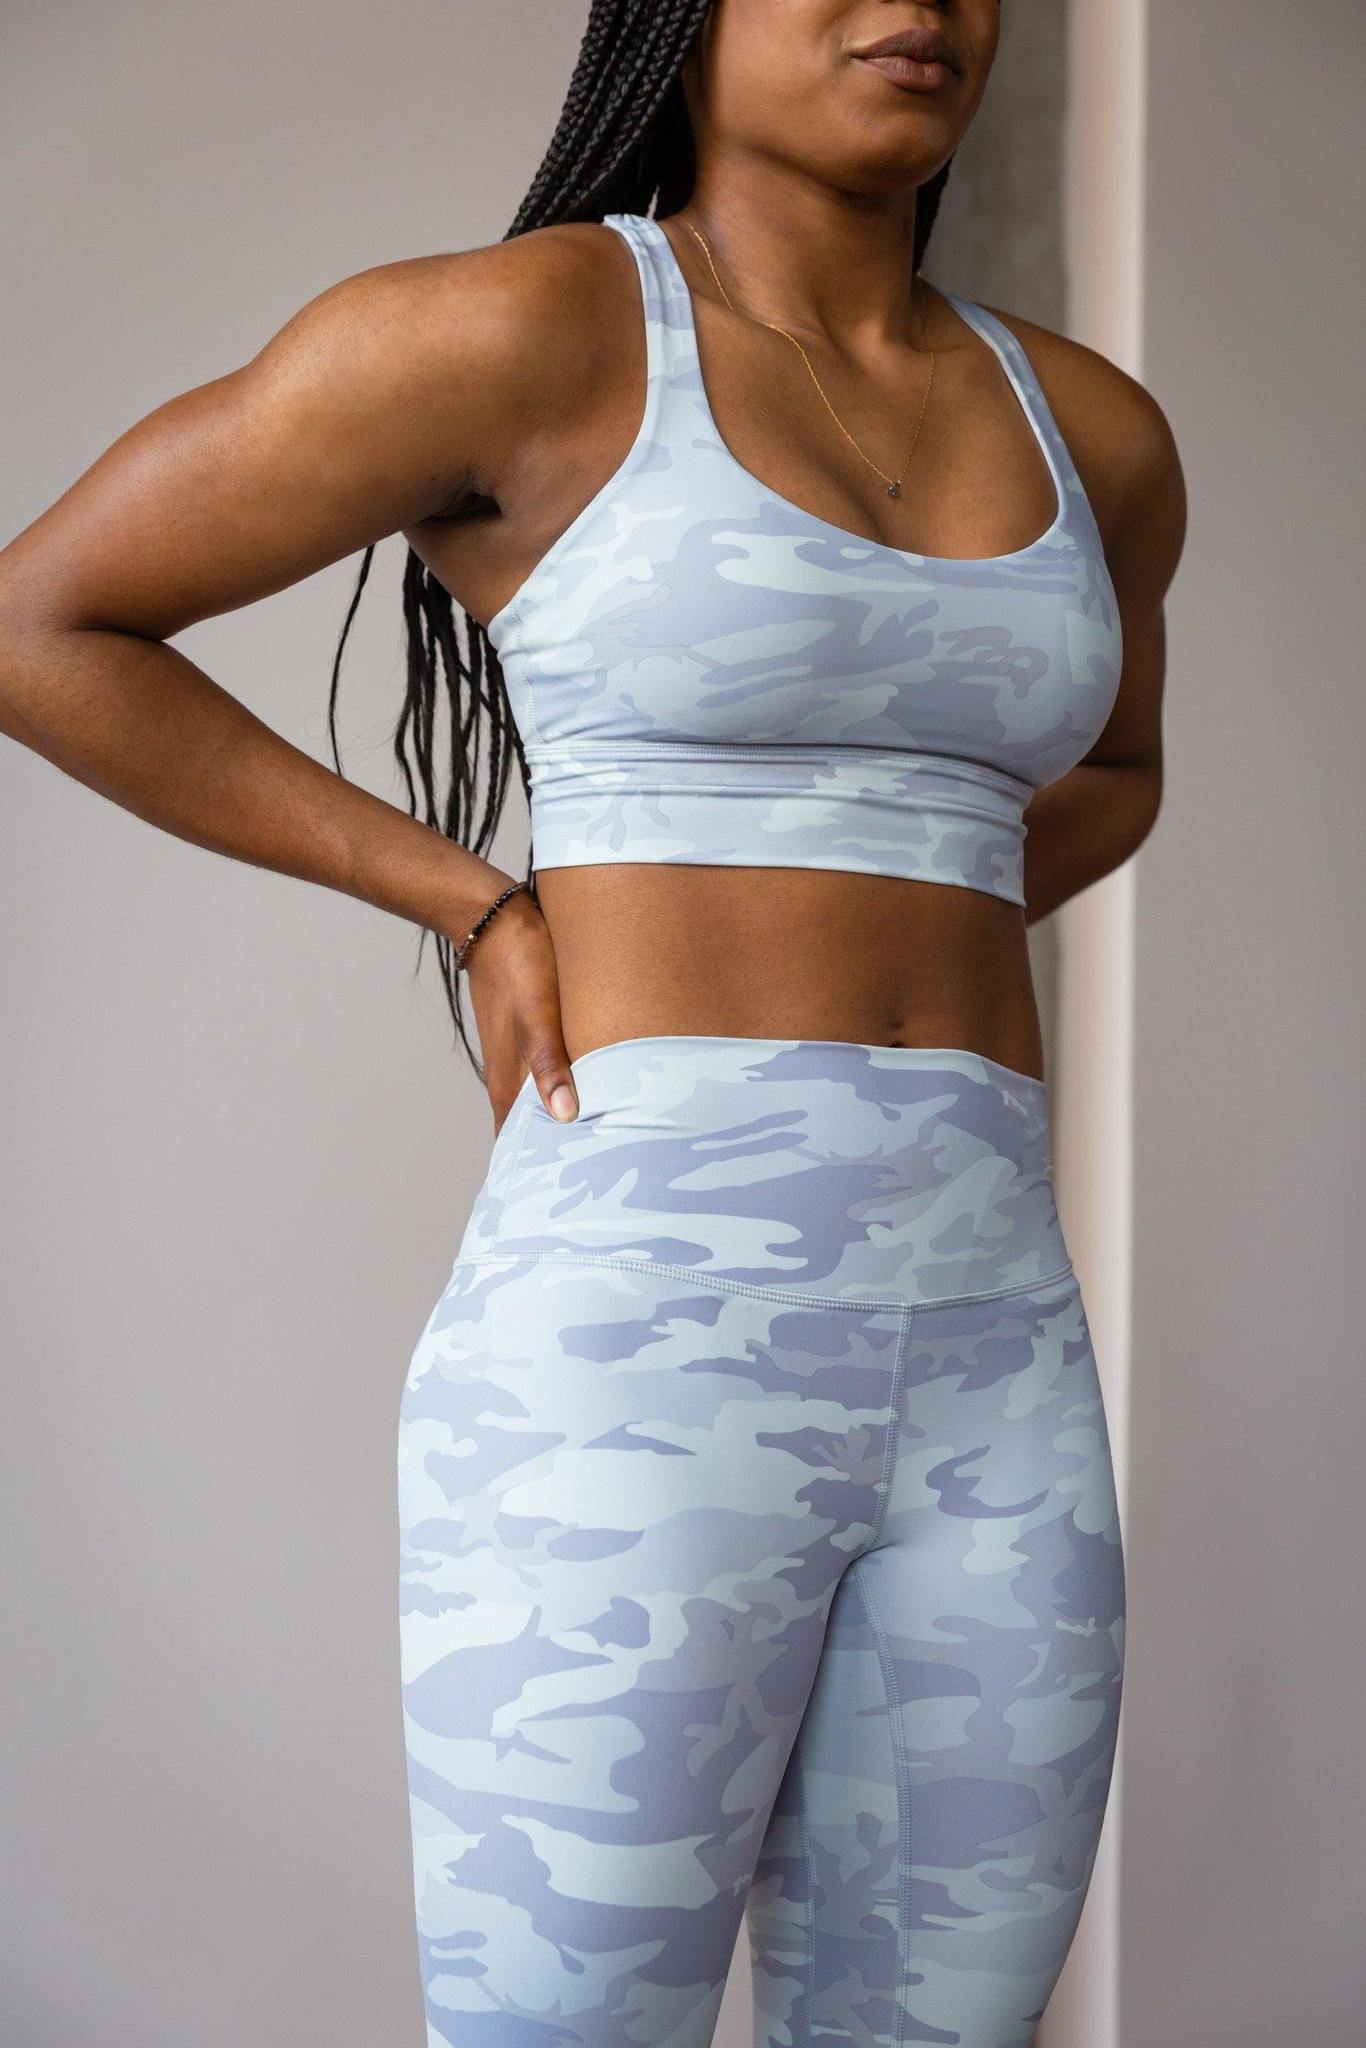 Arctic Camouflage Leggings - BST FITNESS APPAREL